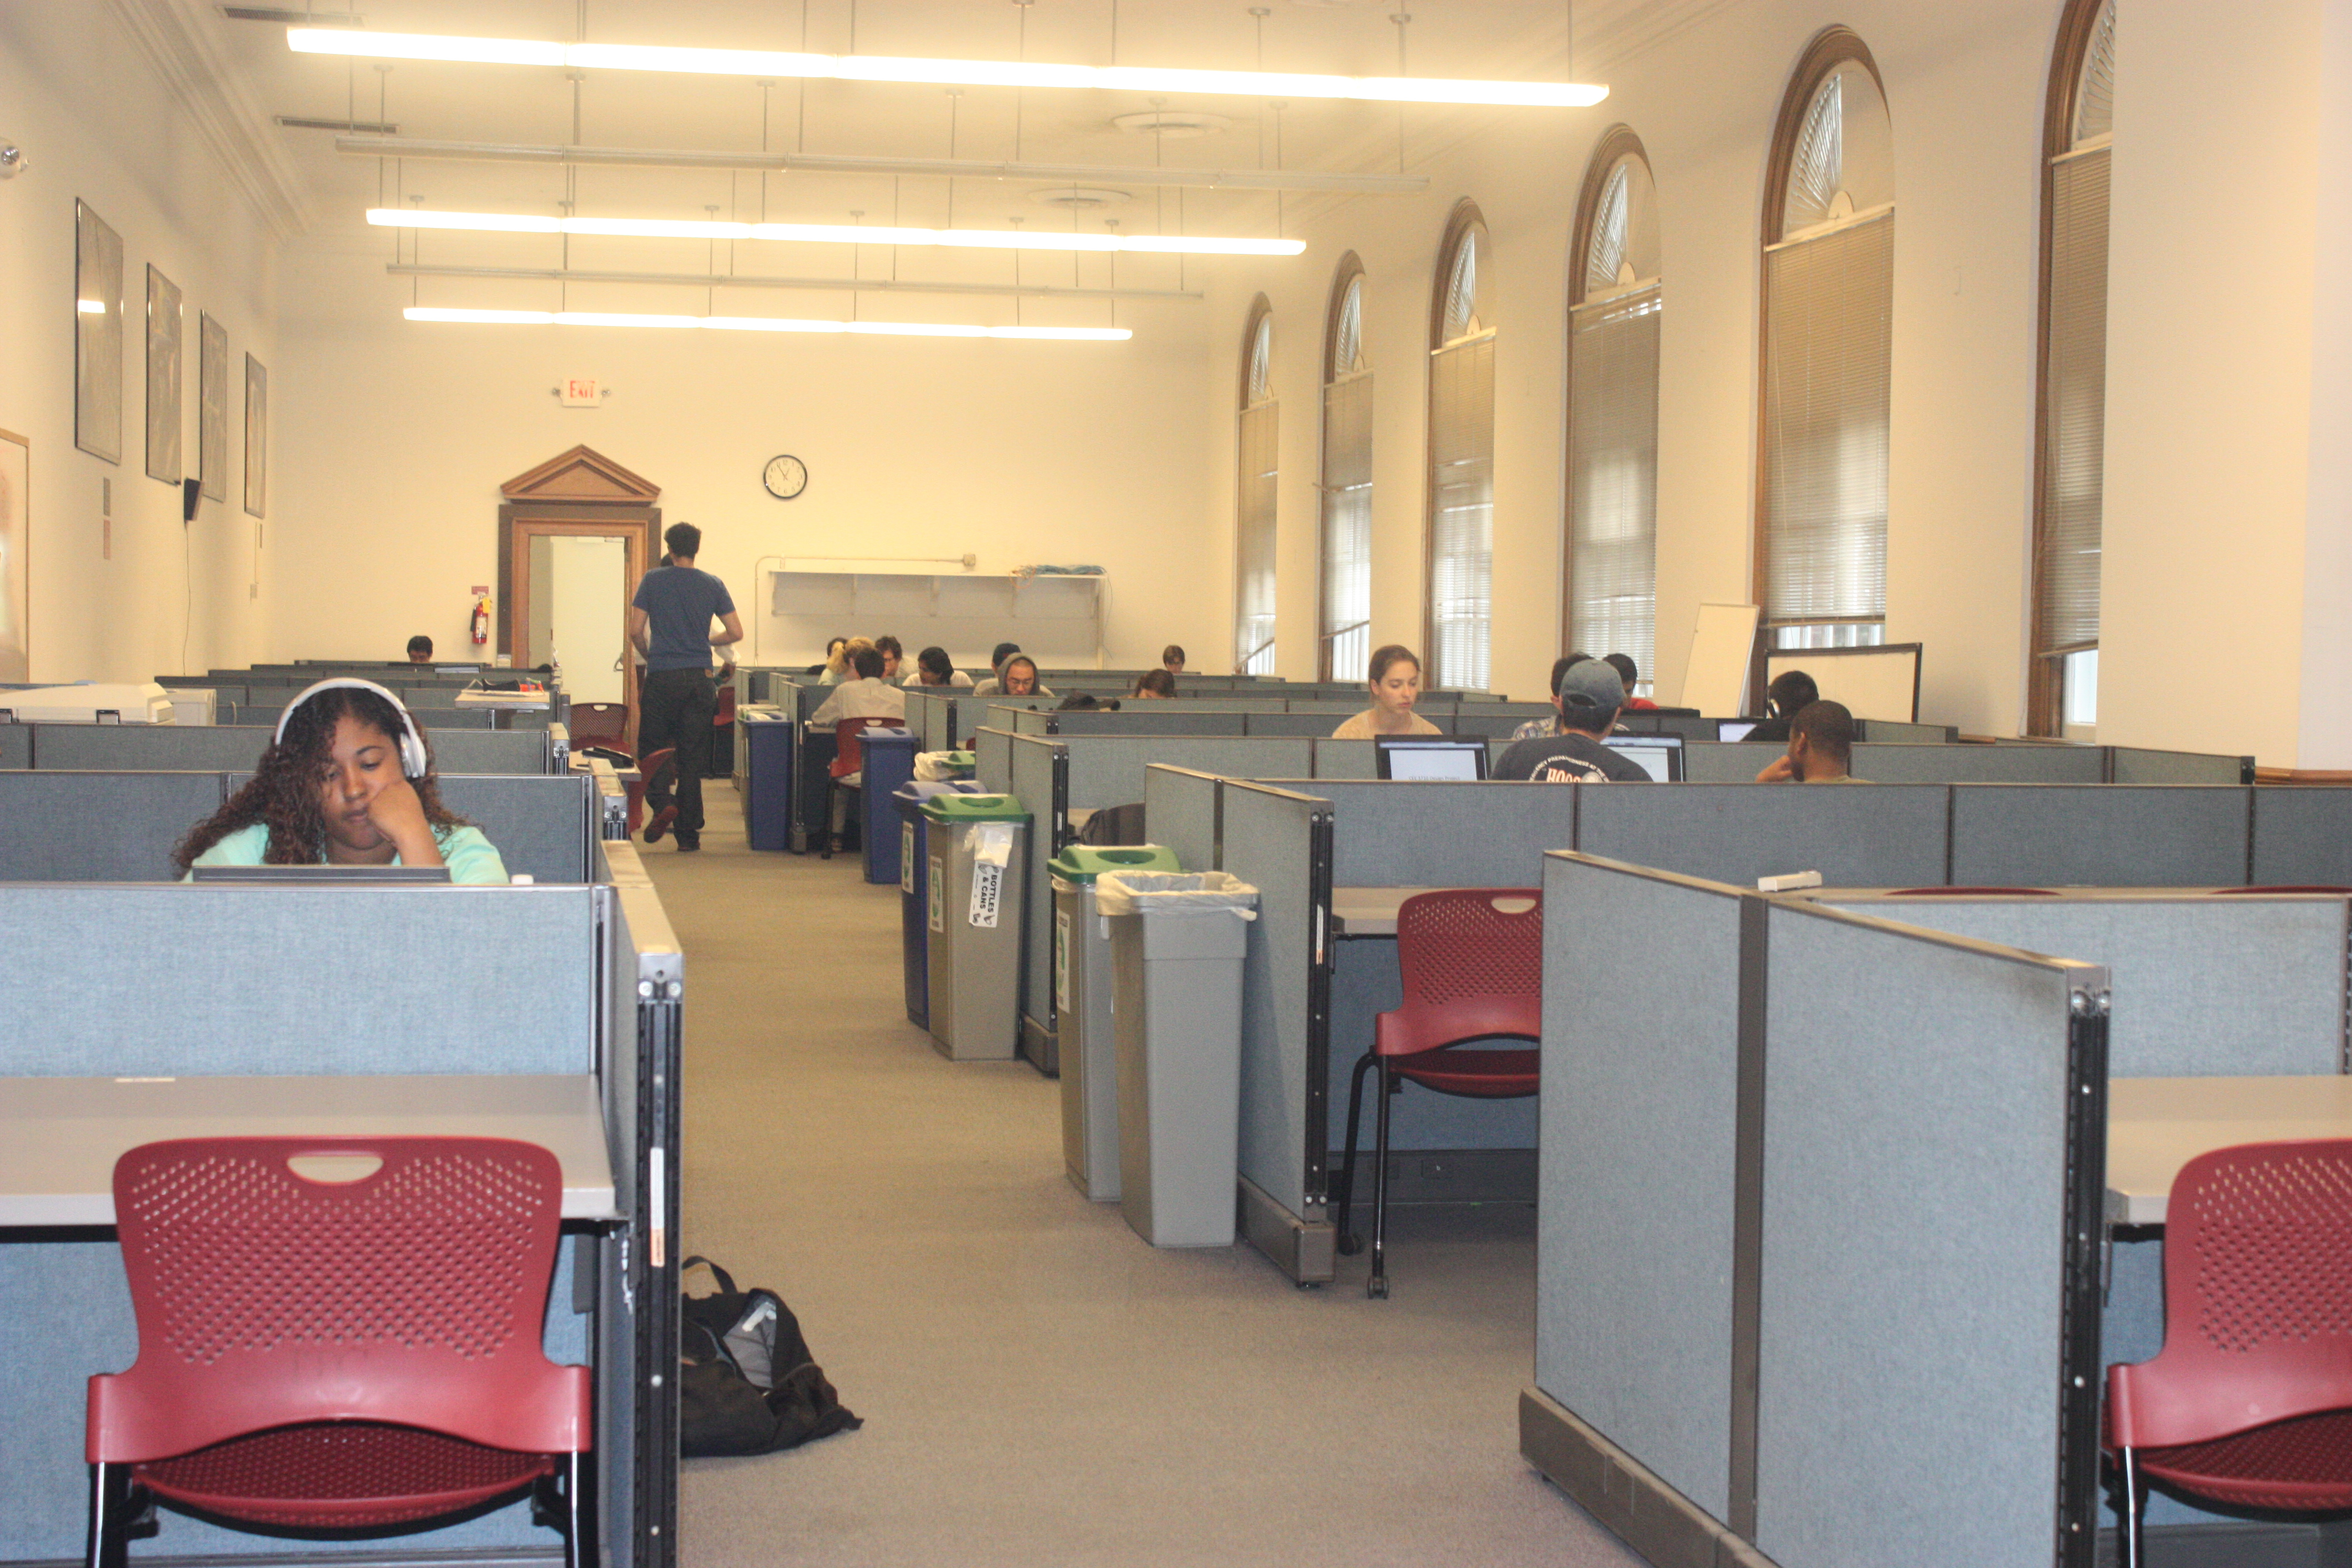 Students studying in cubicles